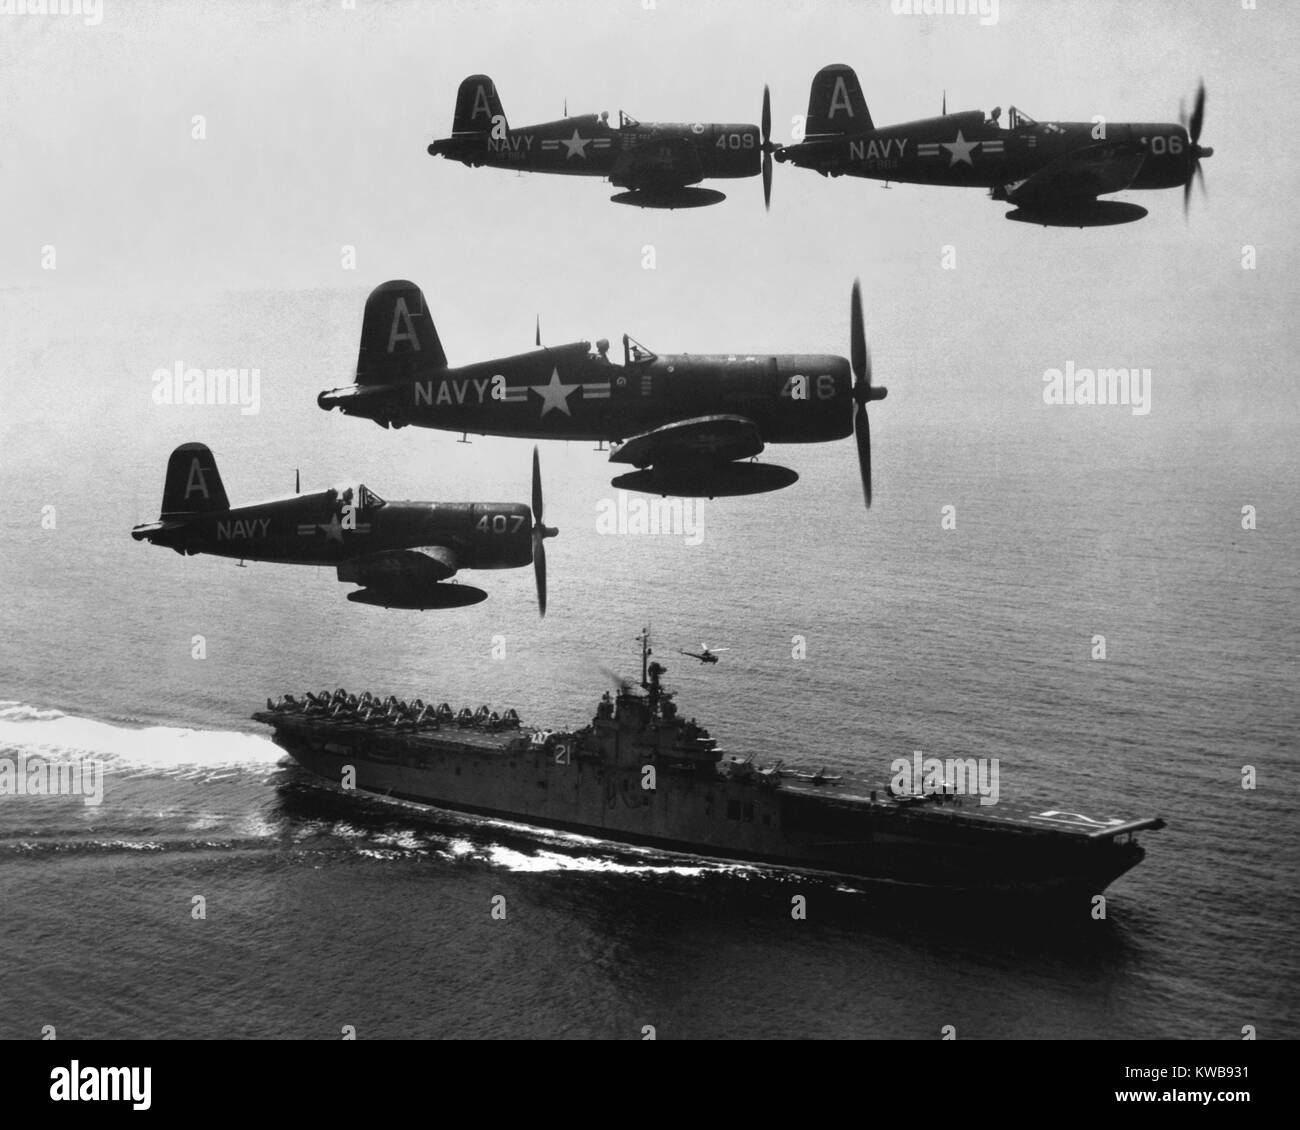 F4U's (Corsairs) returning from a combat mission over North Korea to the USS Boxer. Planes in the next strike are about to be launched from the carrier flight deck. Sept. 4, 1951. Korean War. (BSLOC 2014 11 224) Stock Photo